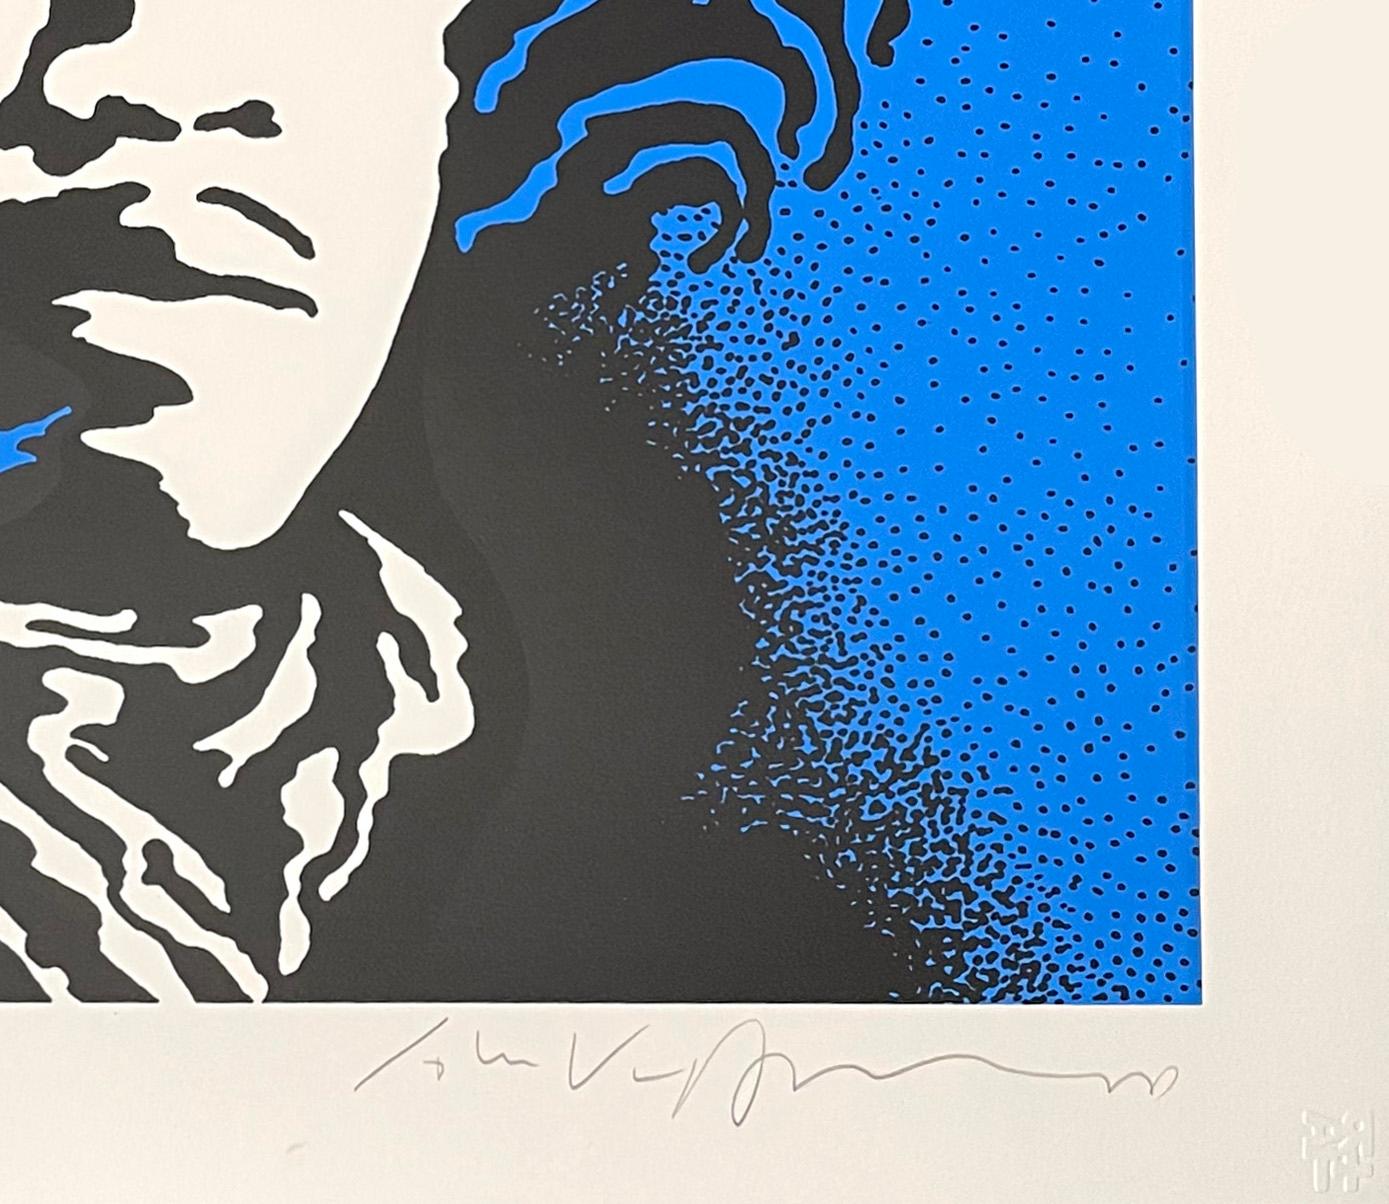 Jimi Hendrix - From the suite of 3 silkscreens, blue, red + silver - hand pulled by the artist
Paper size: 28 x 28